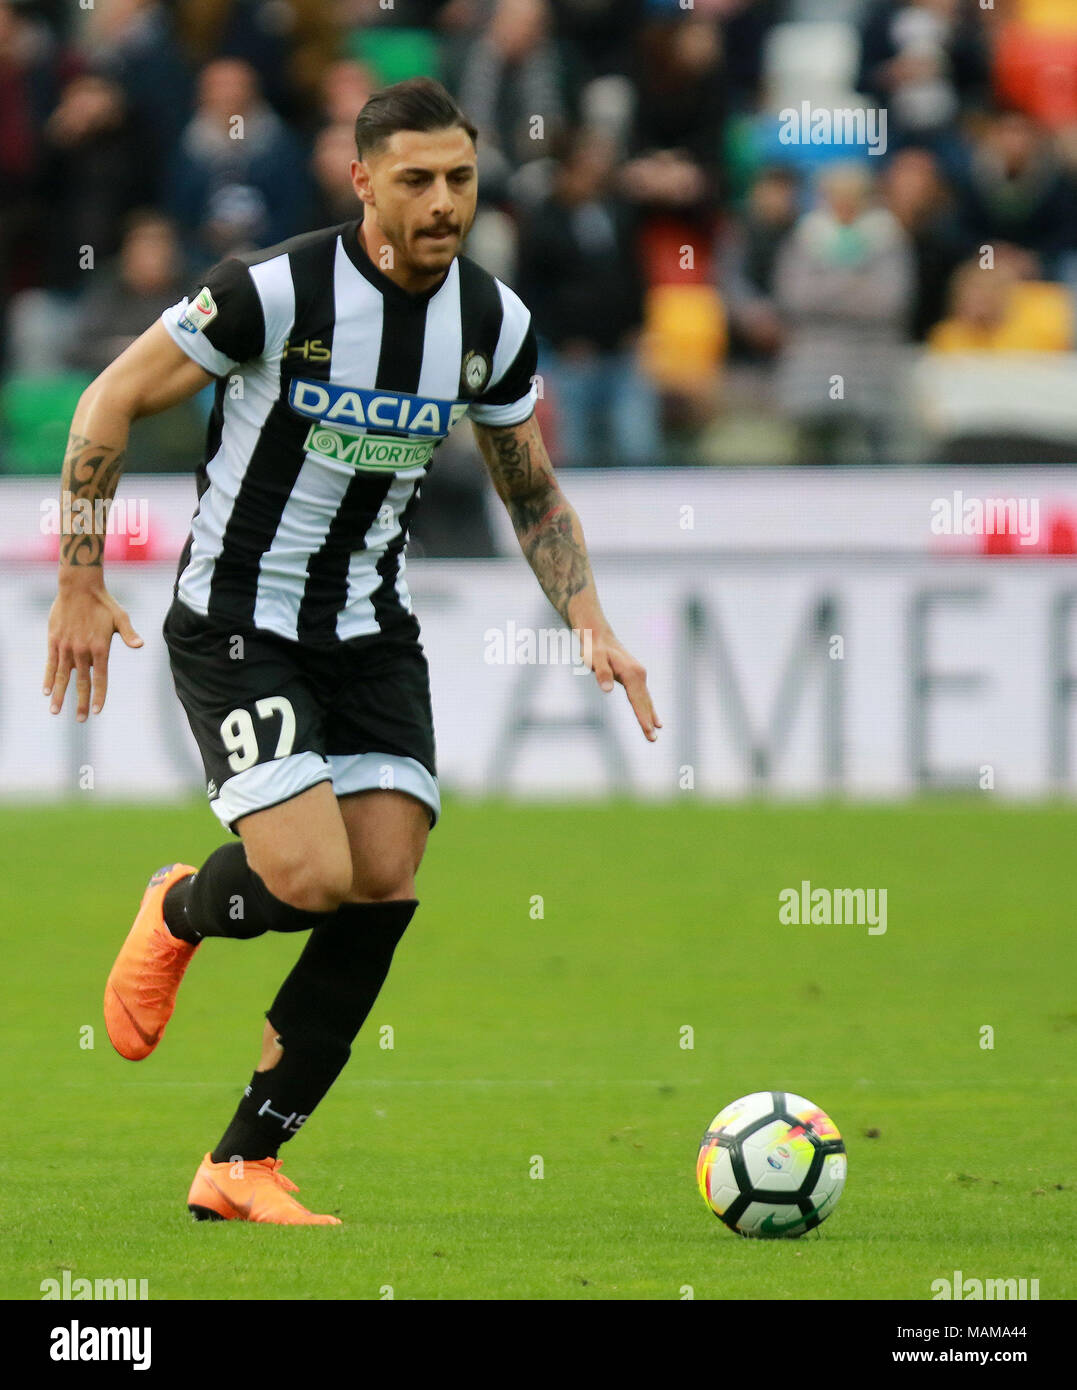 Udine, Italy. 3rd April, 2018. ITALY, Udine: Udinese's forward Giuseppe Pezzella runs with the ball during the Serie A football match between Udinese Calcio v AC Fiorentina at Dacia Arena Stadium on 3rd April, 2018. Credit: Andrea Spinelli/Alamy Live News Stock Photo